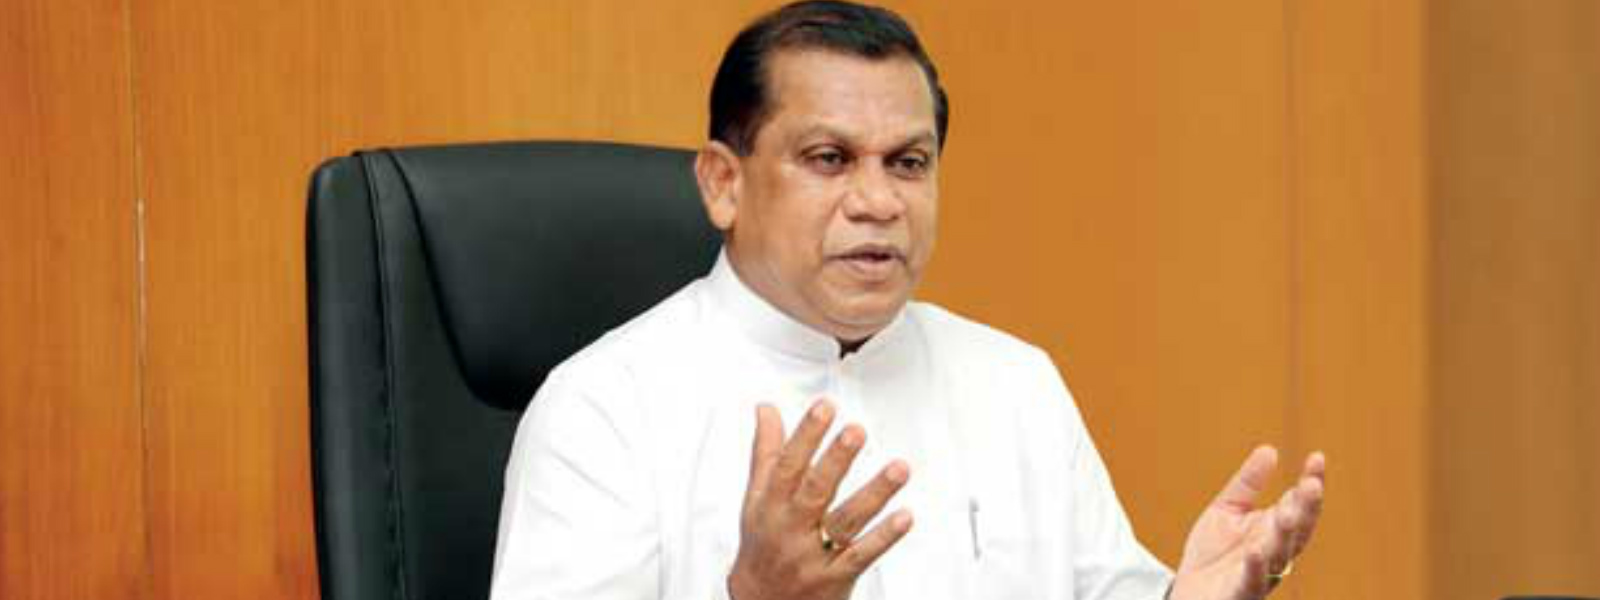 Maddumabandara appointed Minister of Law and Order